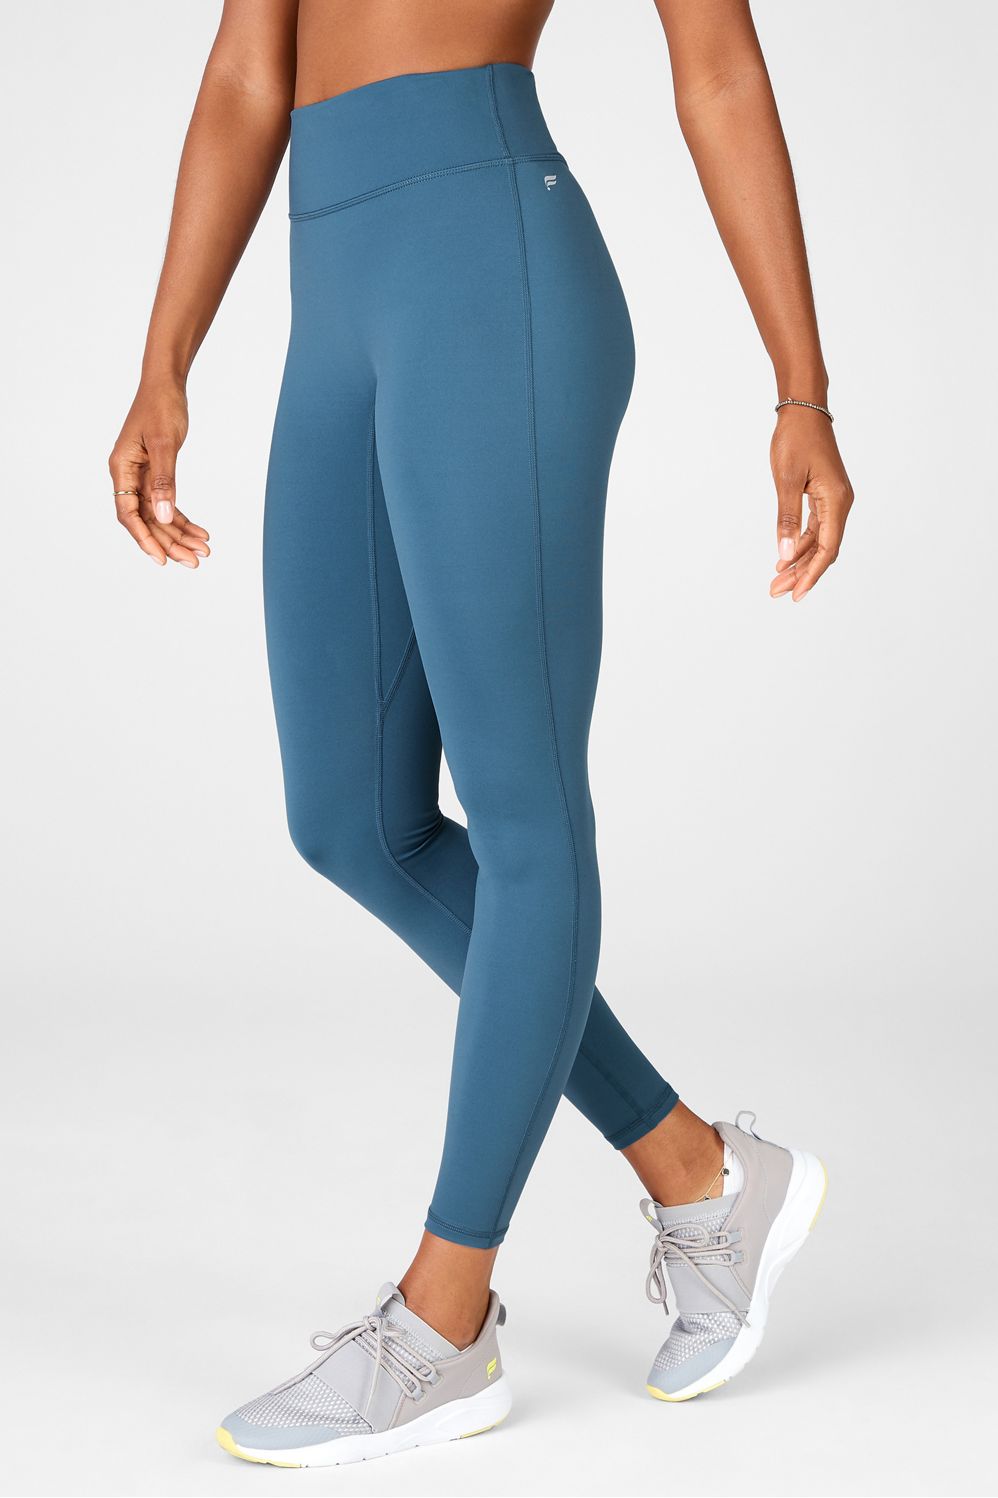 Fabletics High-Waisted Motion365 Legging Womens Teaberry Size